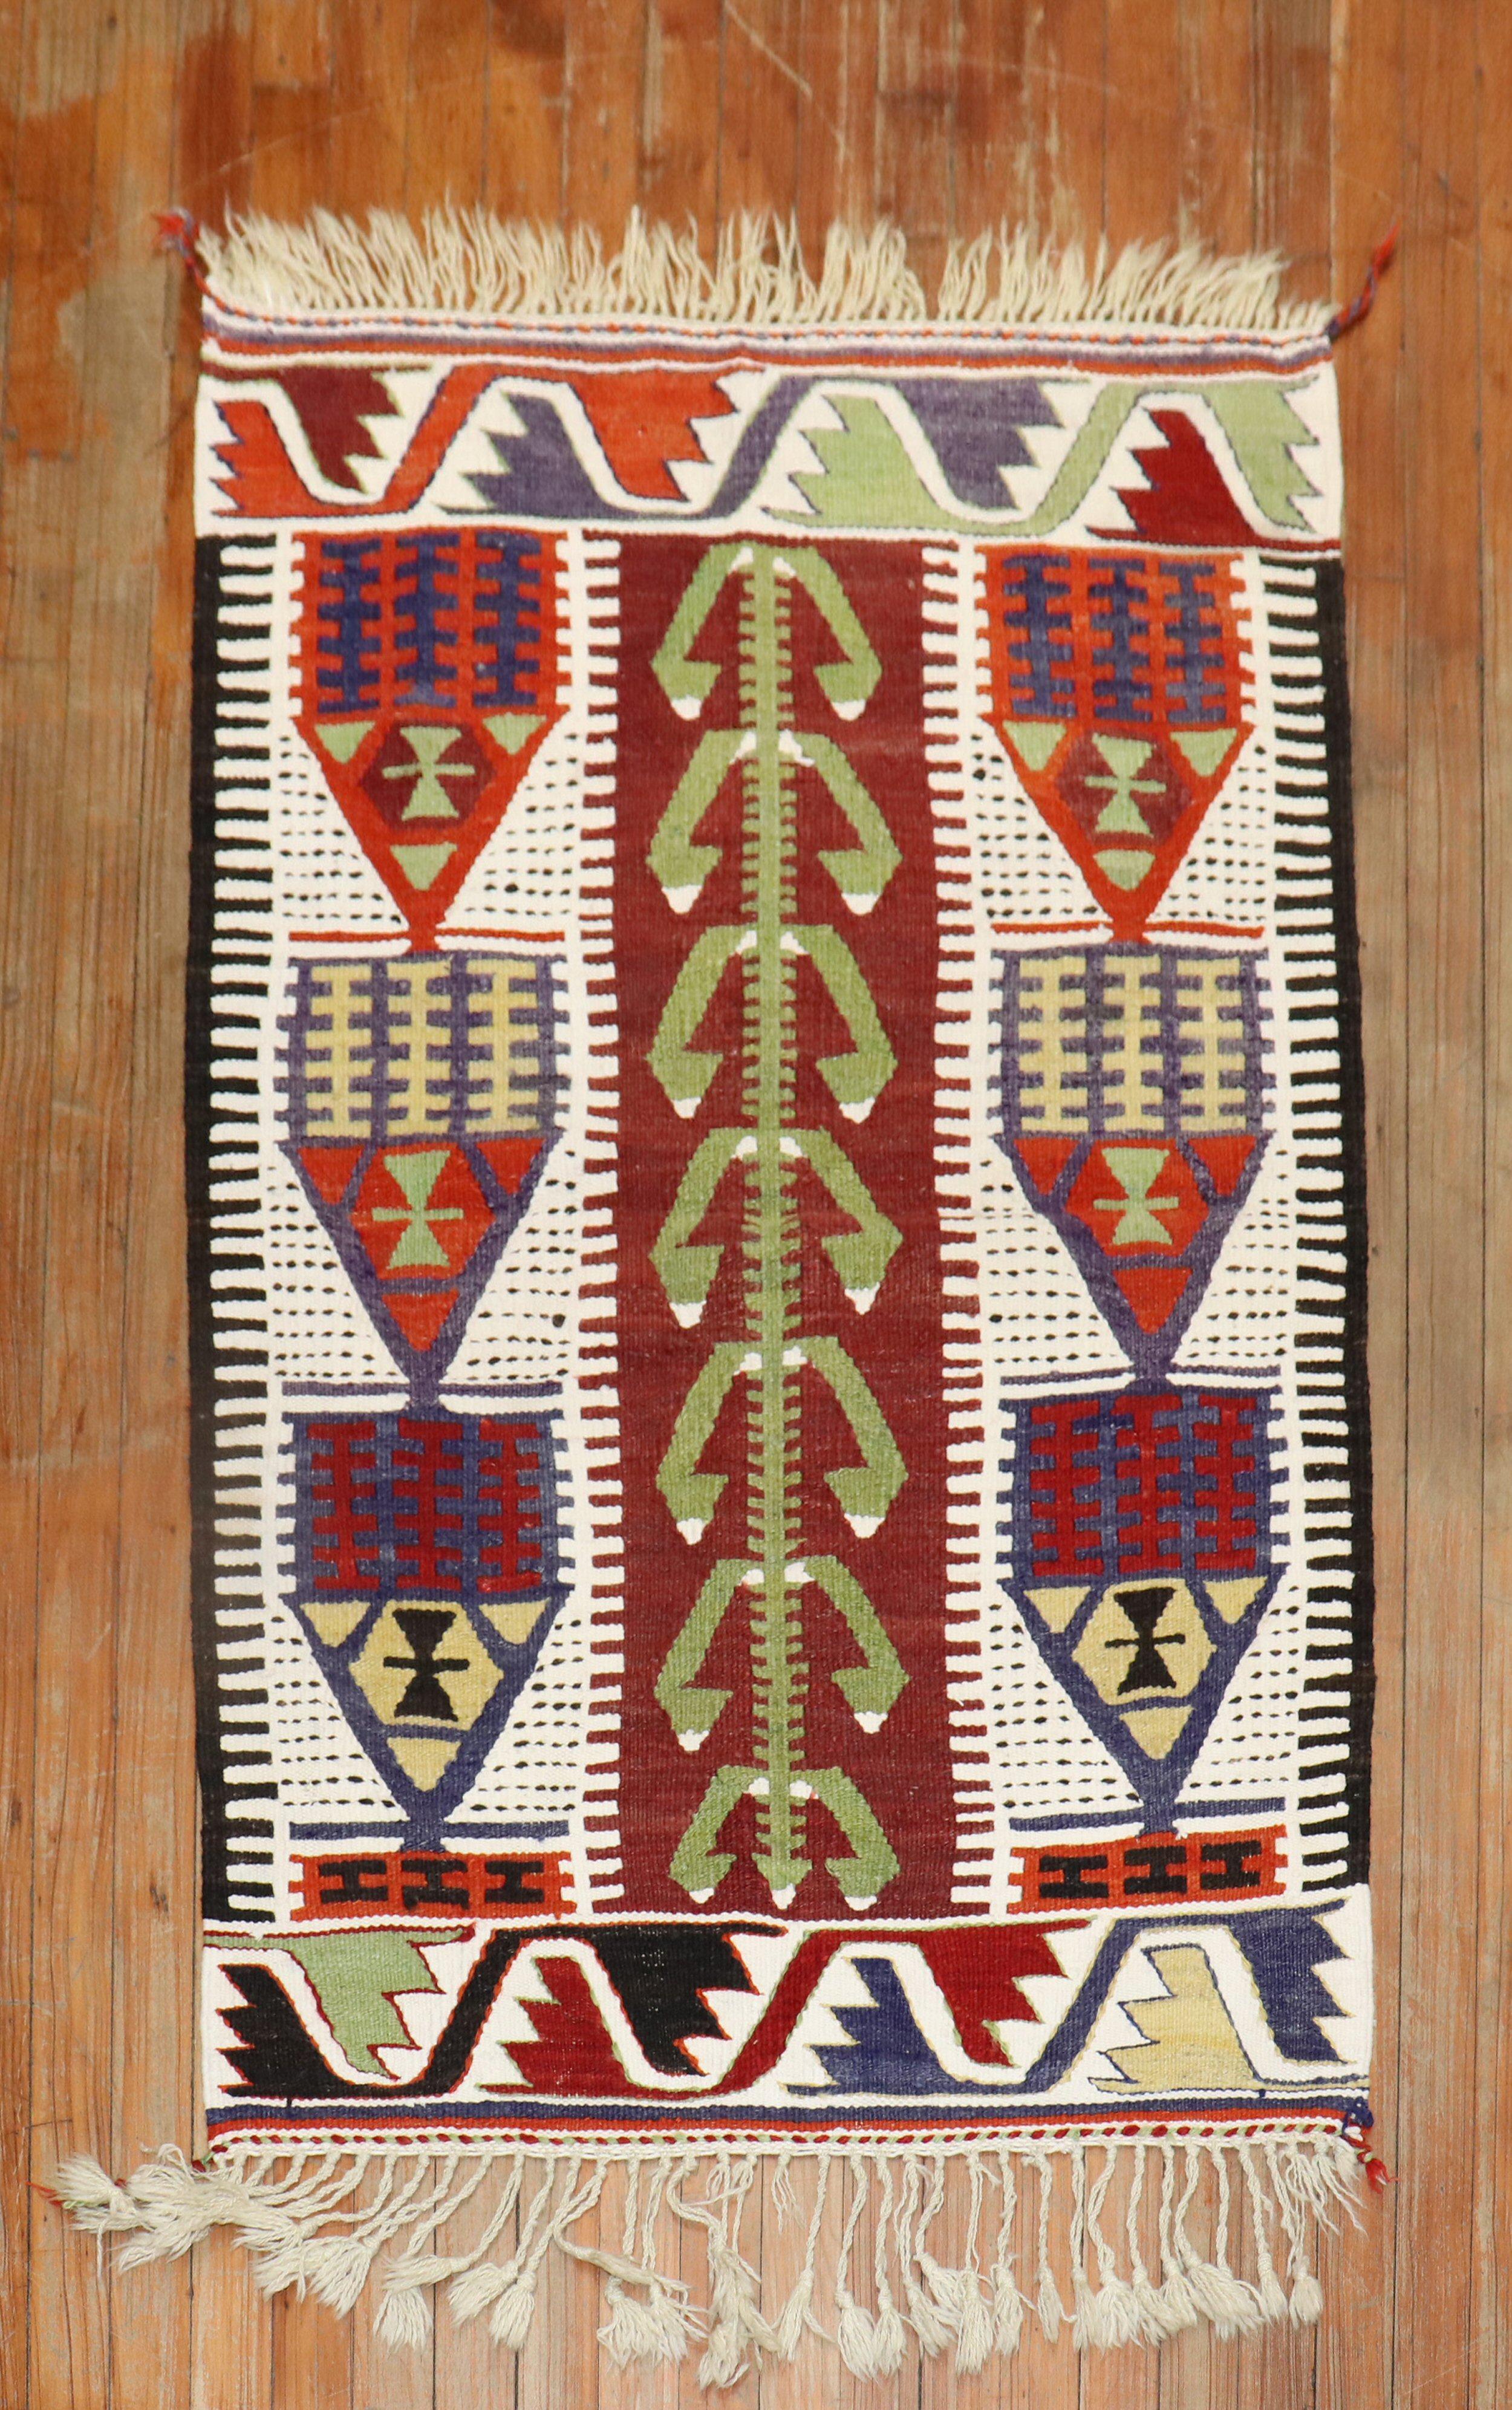 20th century Scatter size Turkish Kilim flat-weave

Measures: 2'10'' x 4'3